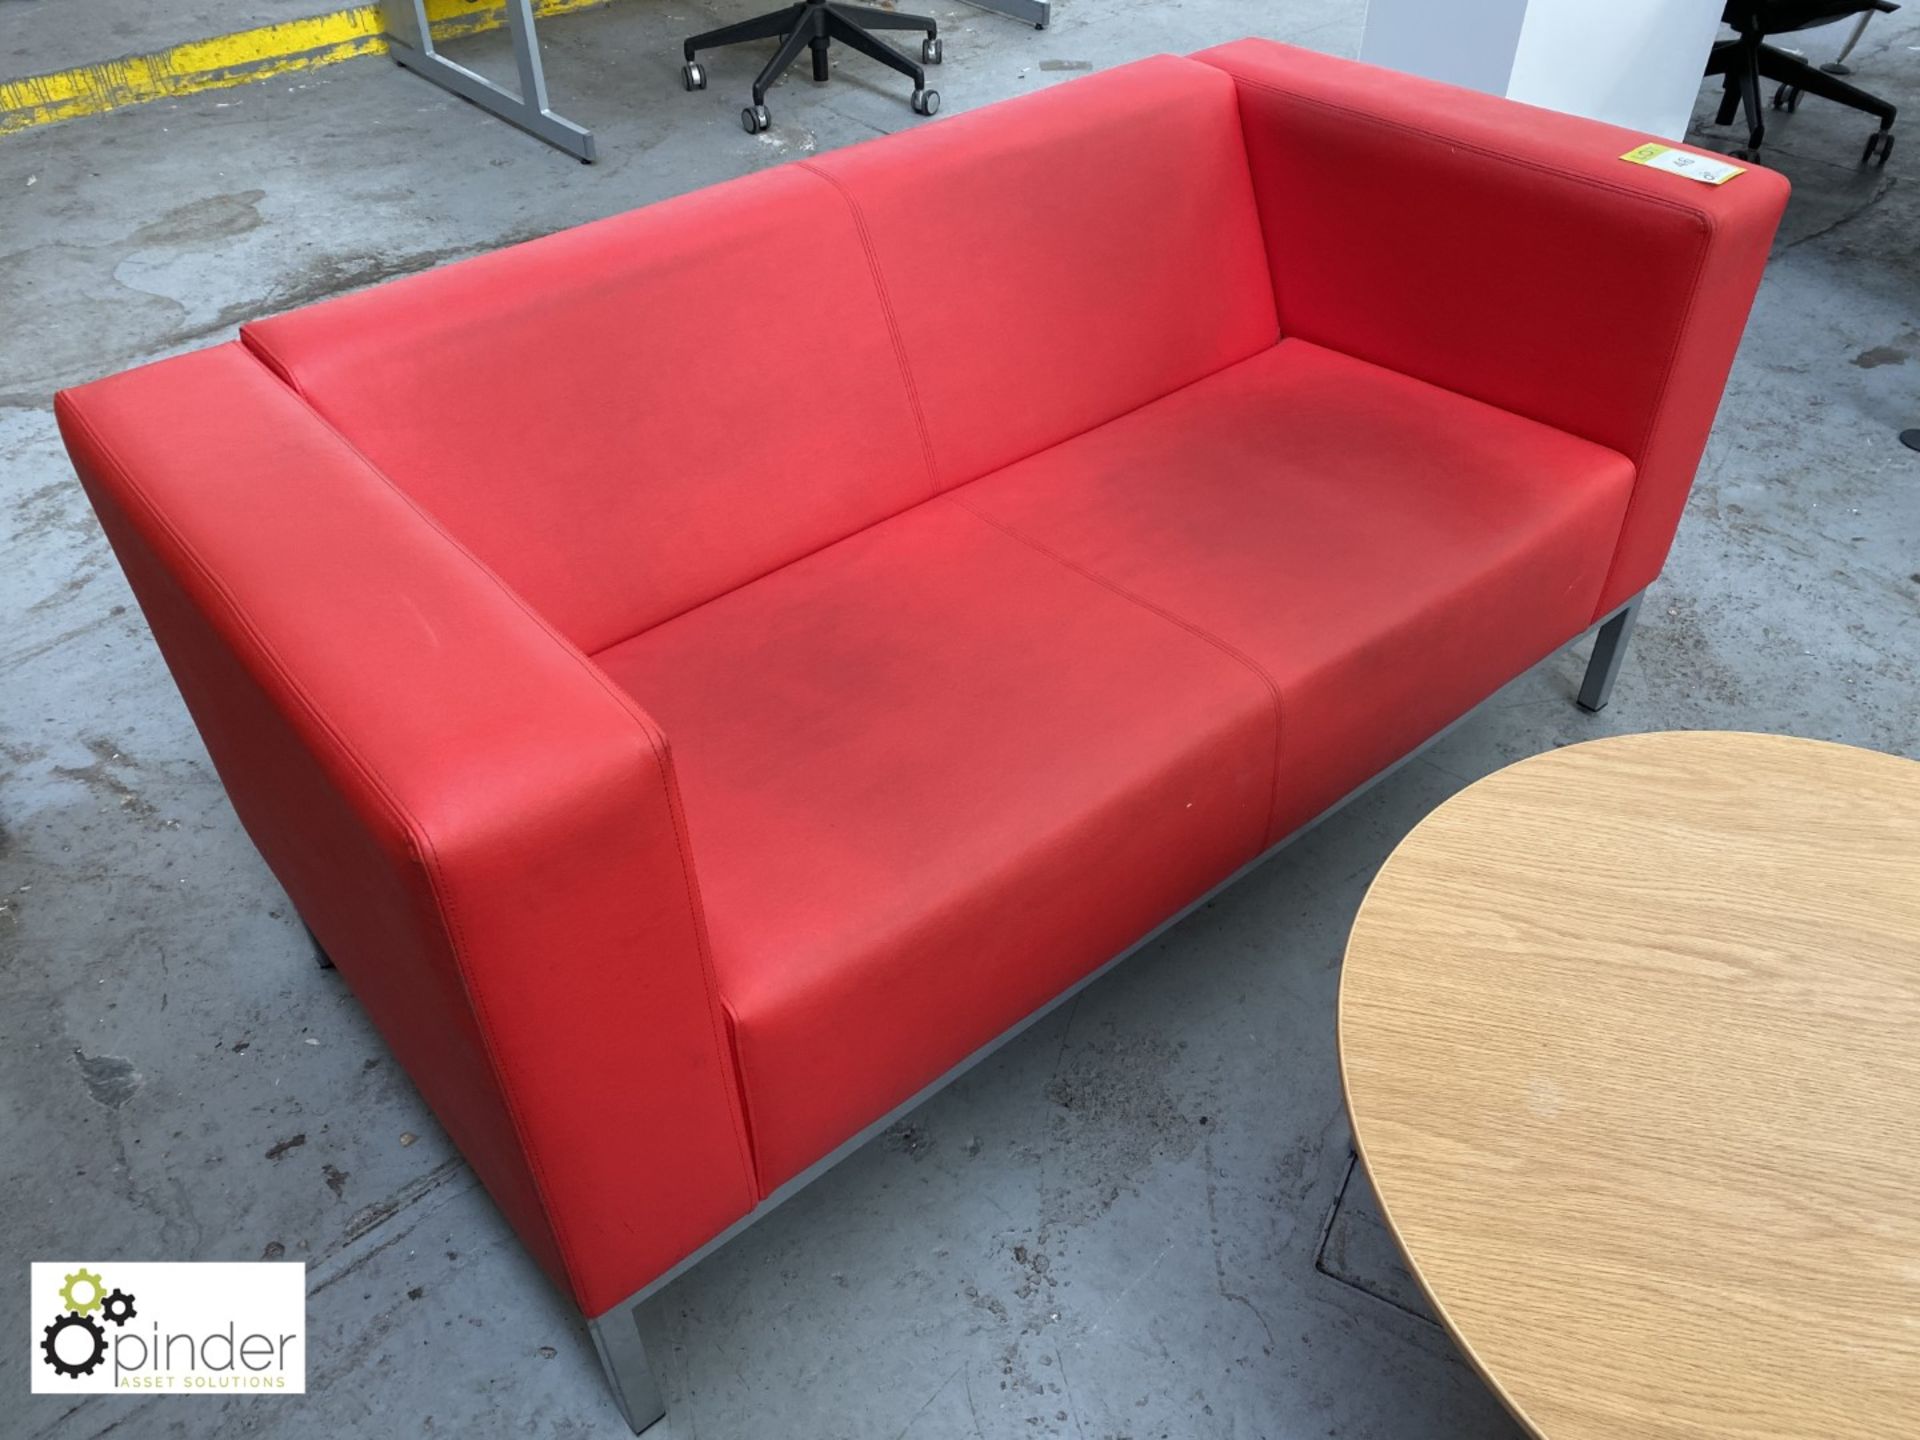 Pledge leather upholstered Reception Sofa, red, 1550mm x 760mm - Image 2 of 2